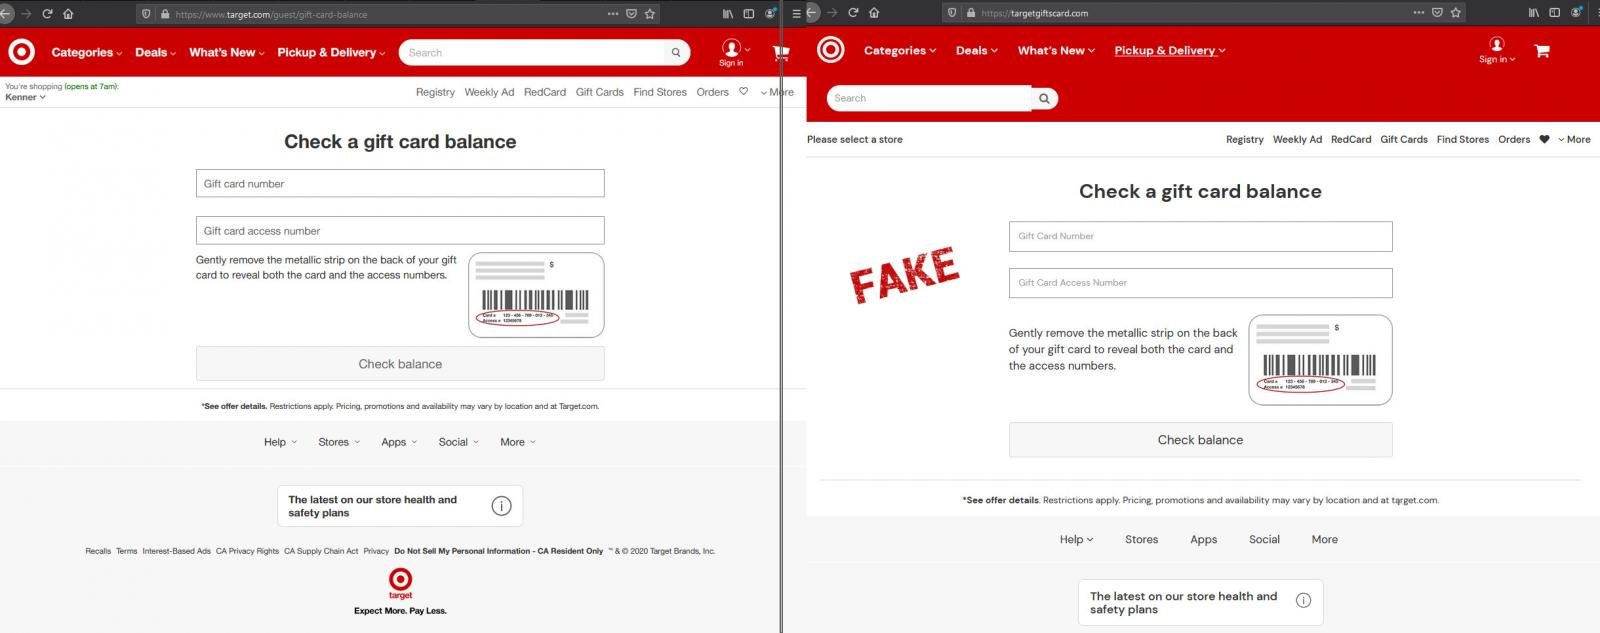 Scammers spoof Target's gift card balance checking page